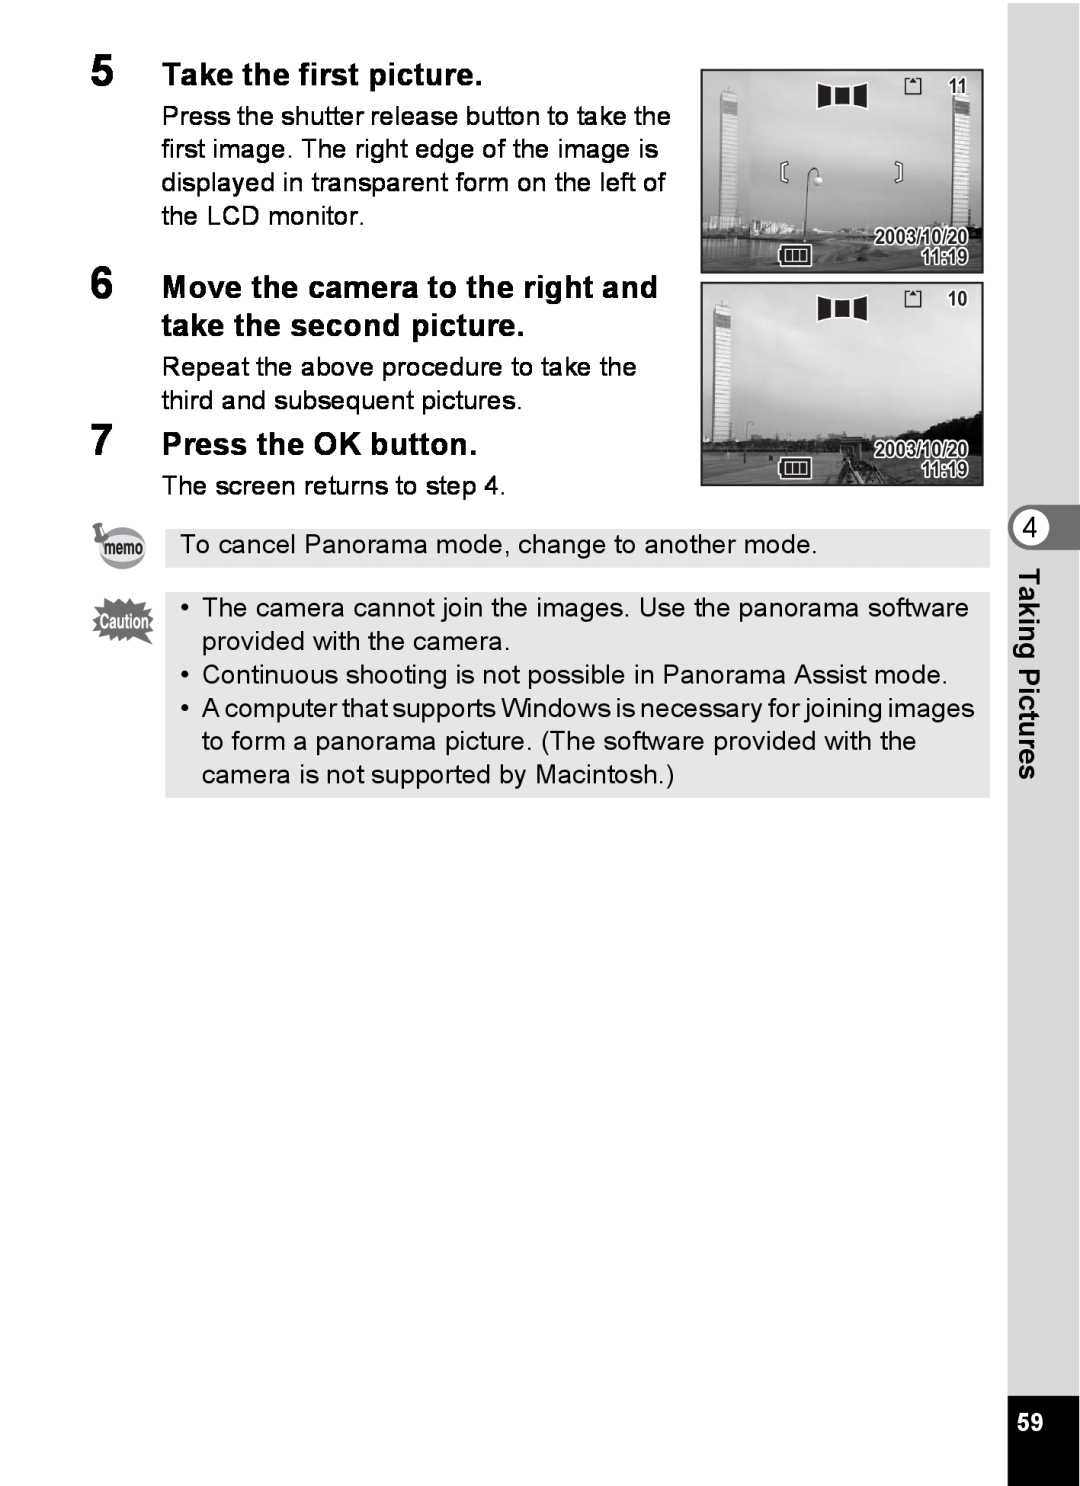 Pentax S4 manual Take the first picture, Move the camera to the right and, take the second picture, Press the OK button 